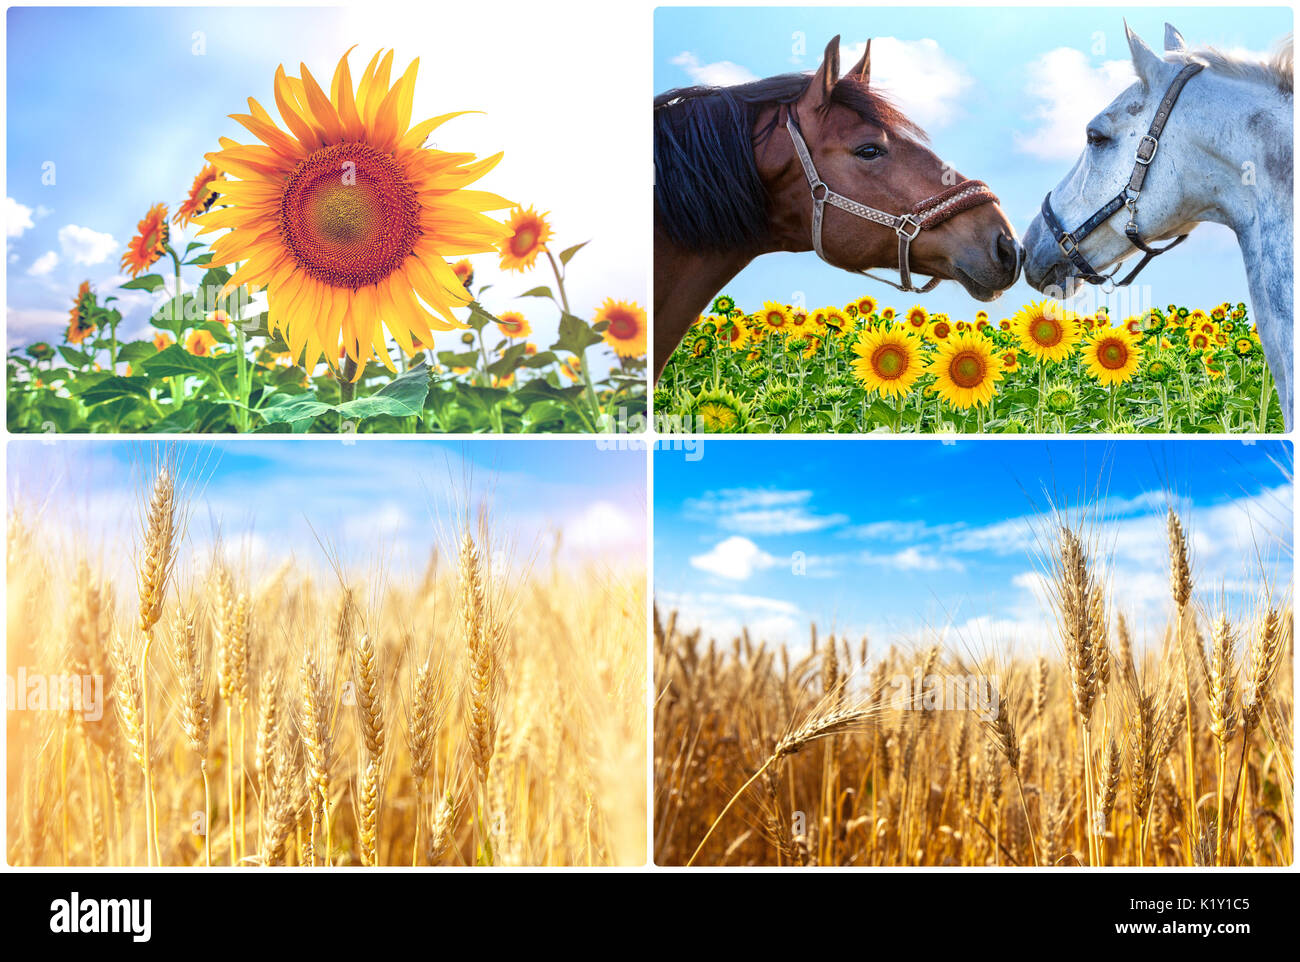 Wheat field. Ears of golden wheat close up. Beautiful Nature Sunset Landscape. Rural Scenery under Shining Sunlight. Background of ripening ears of meadow wheat field. Rich harvest Concept. Sunflower in field, with an expressive sky. Stock Photo